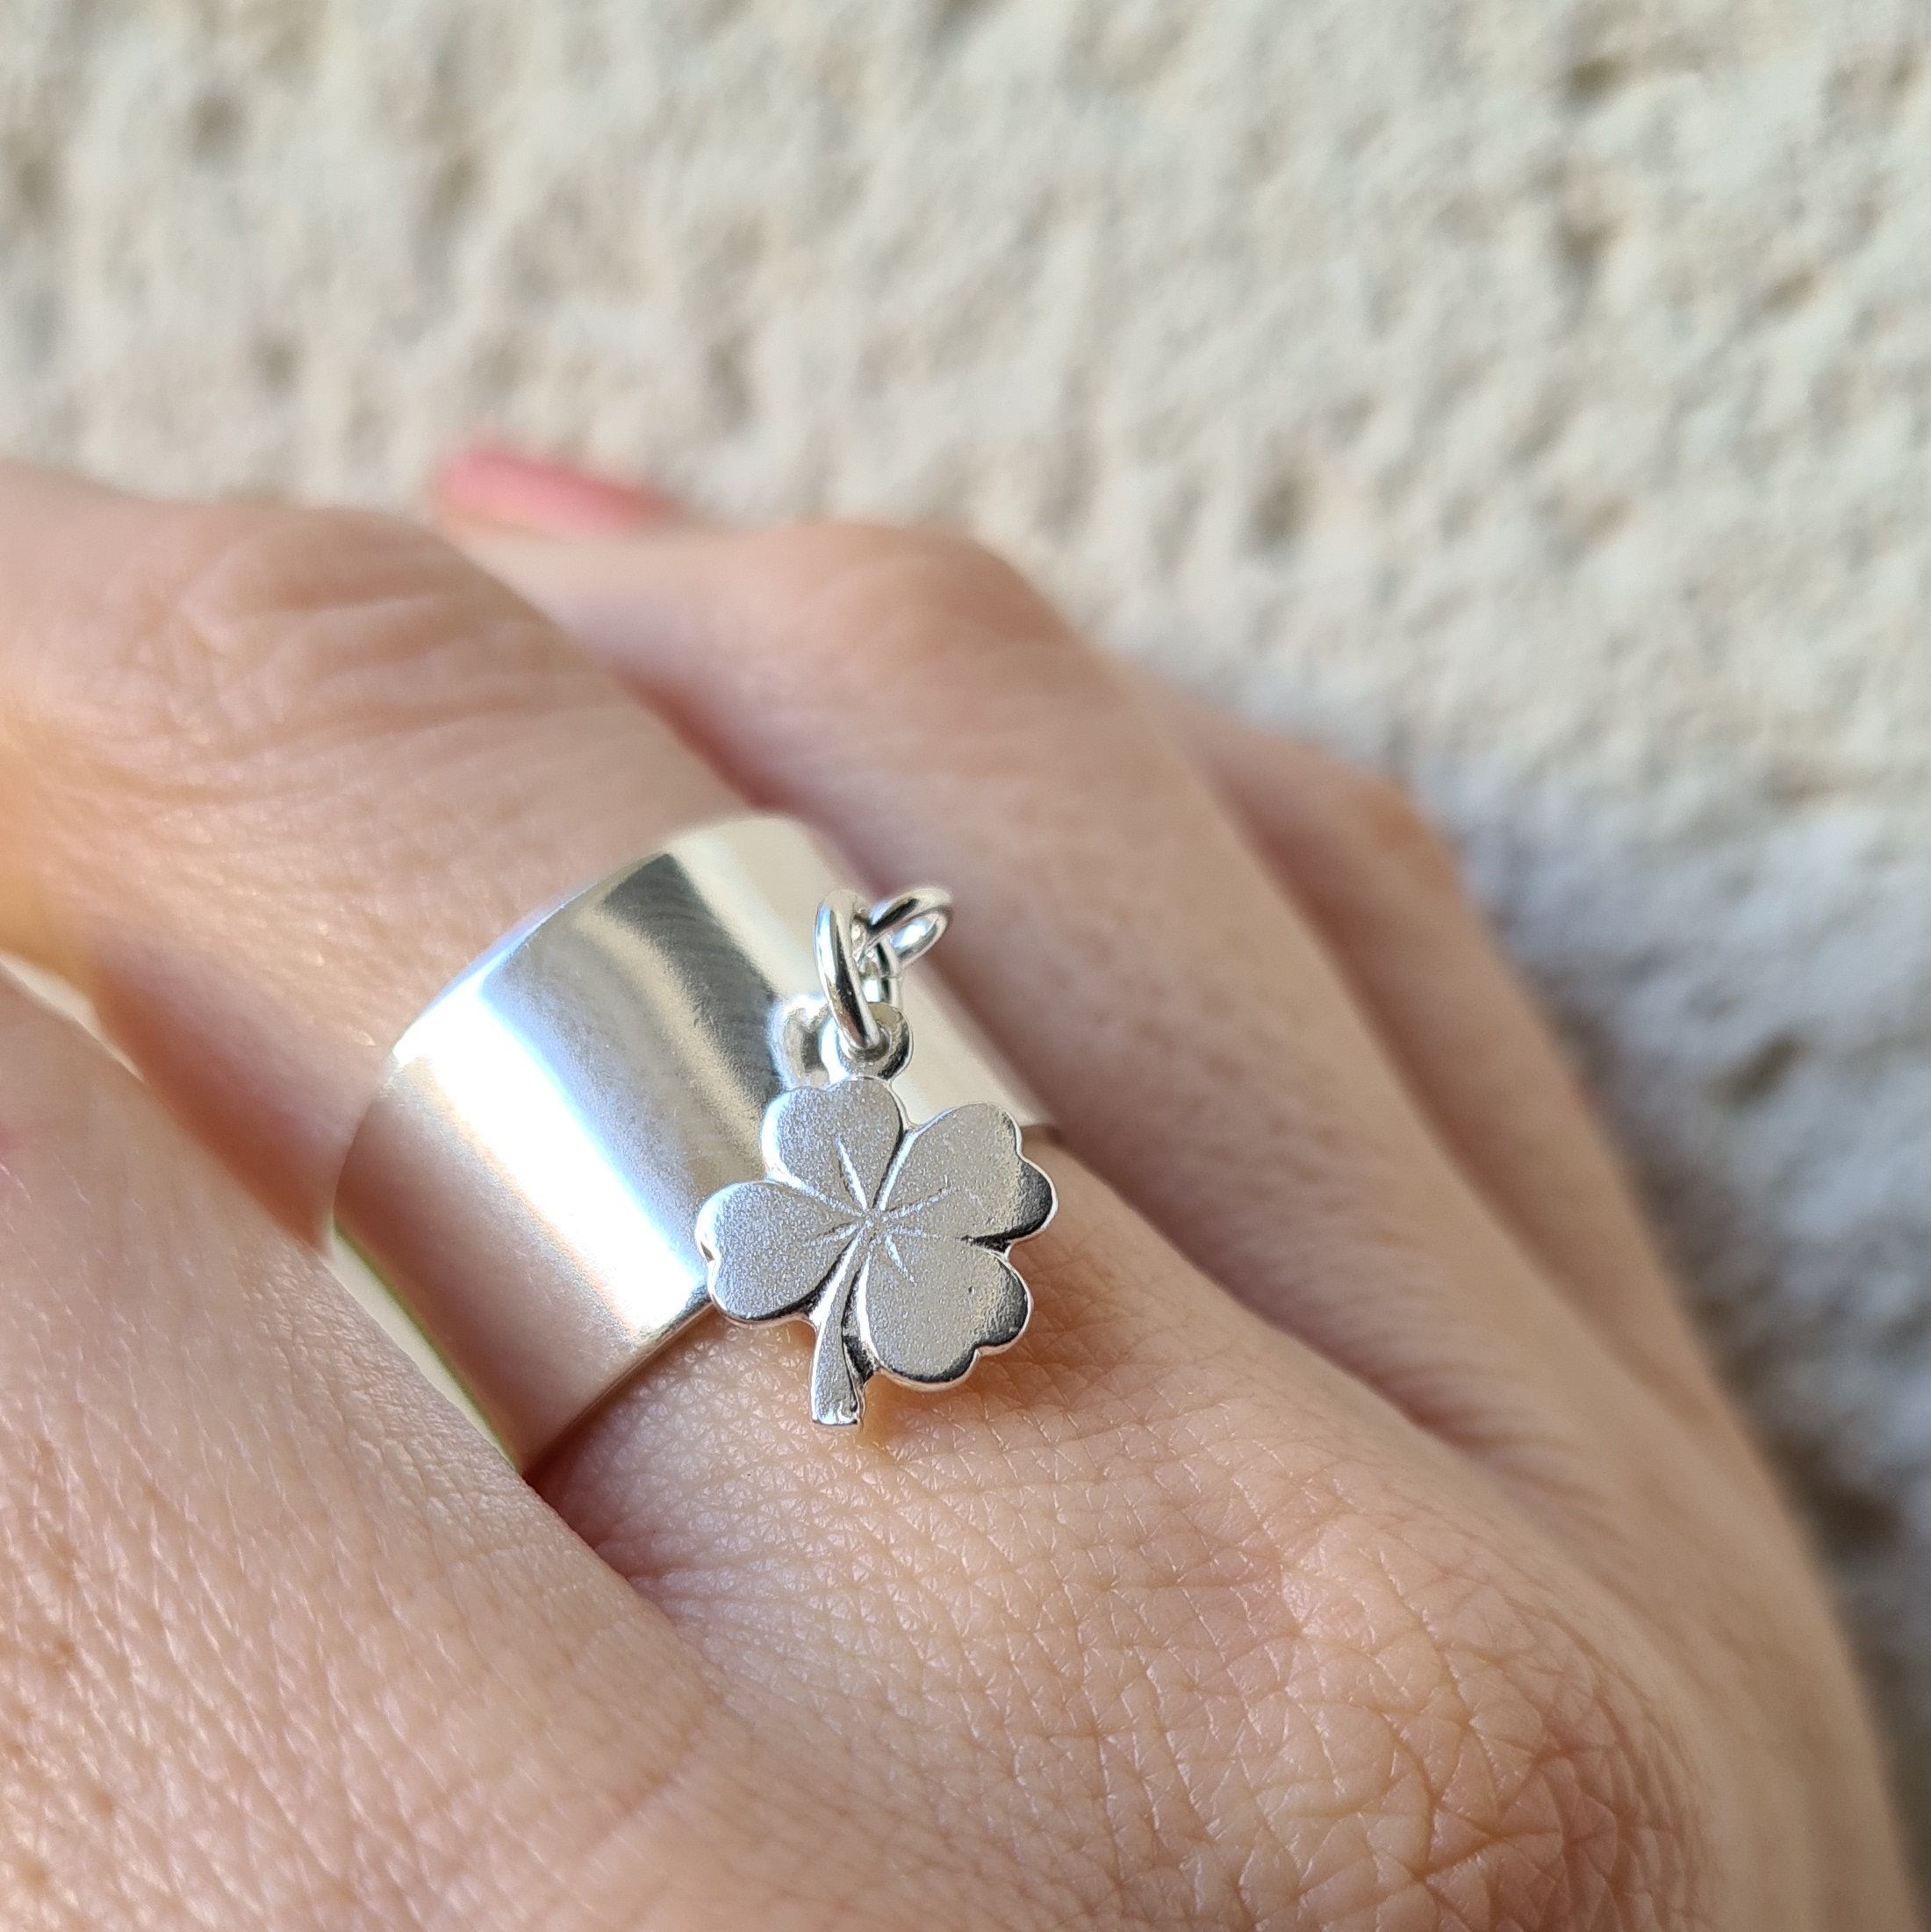 Enchanting Ring with Delicate 4-Leaf Clover